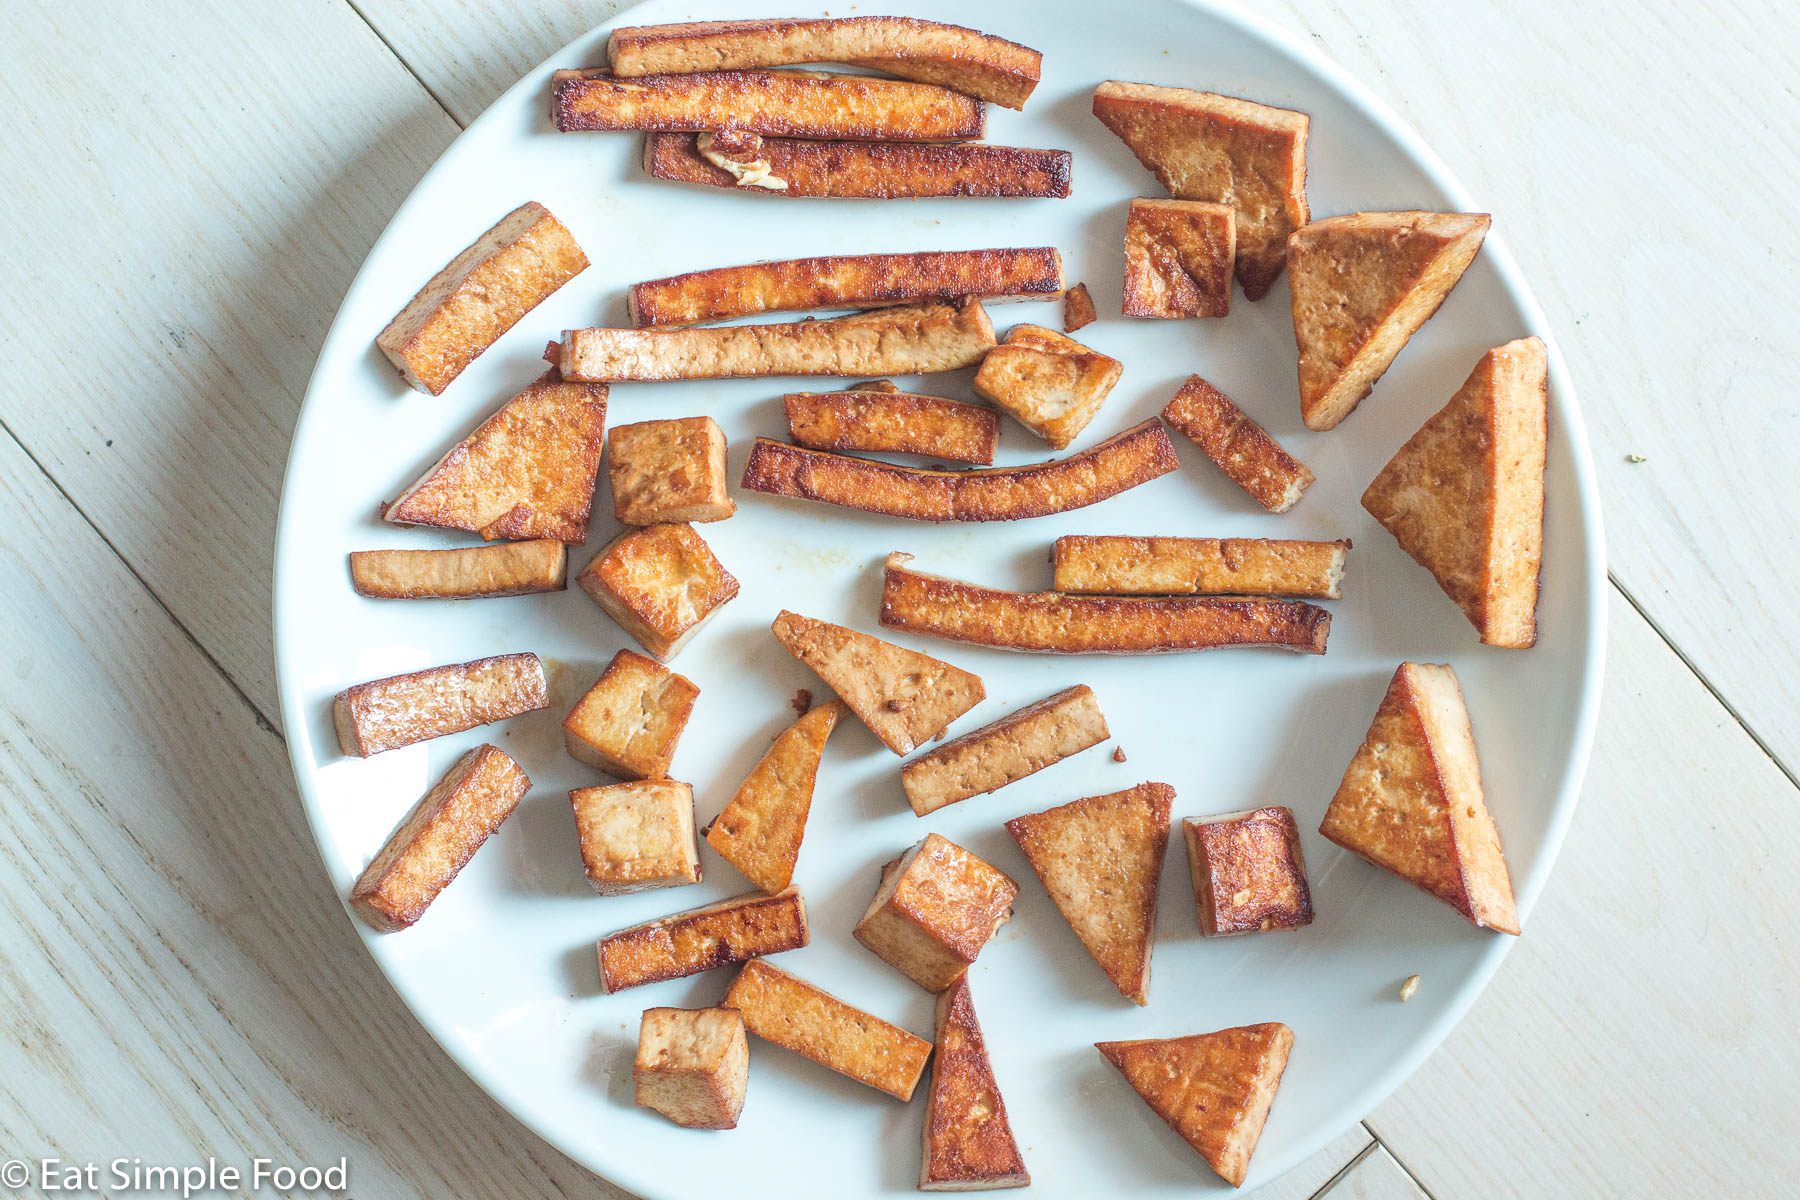 Pan fried and browned cooked tofu in a different shapes (wedges, cubes, slices, triangles) on a white plate on a white table.